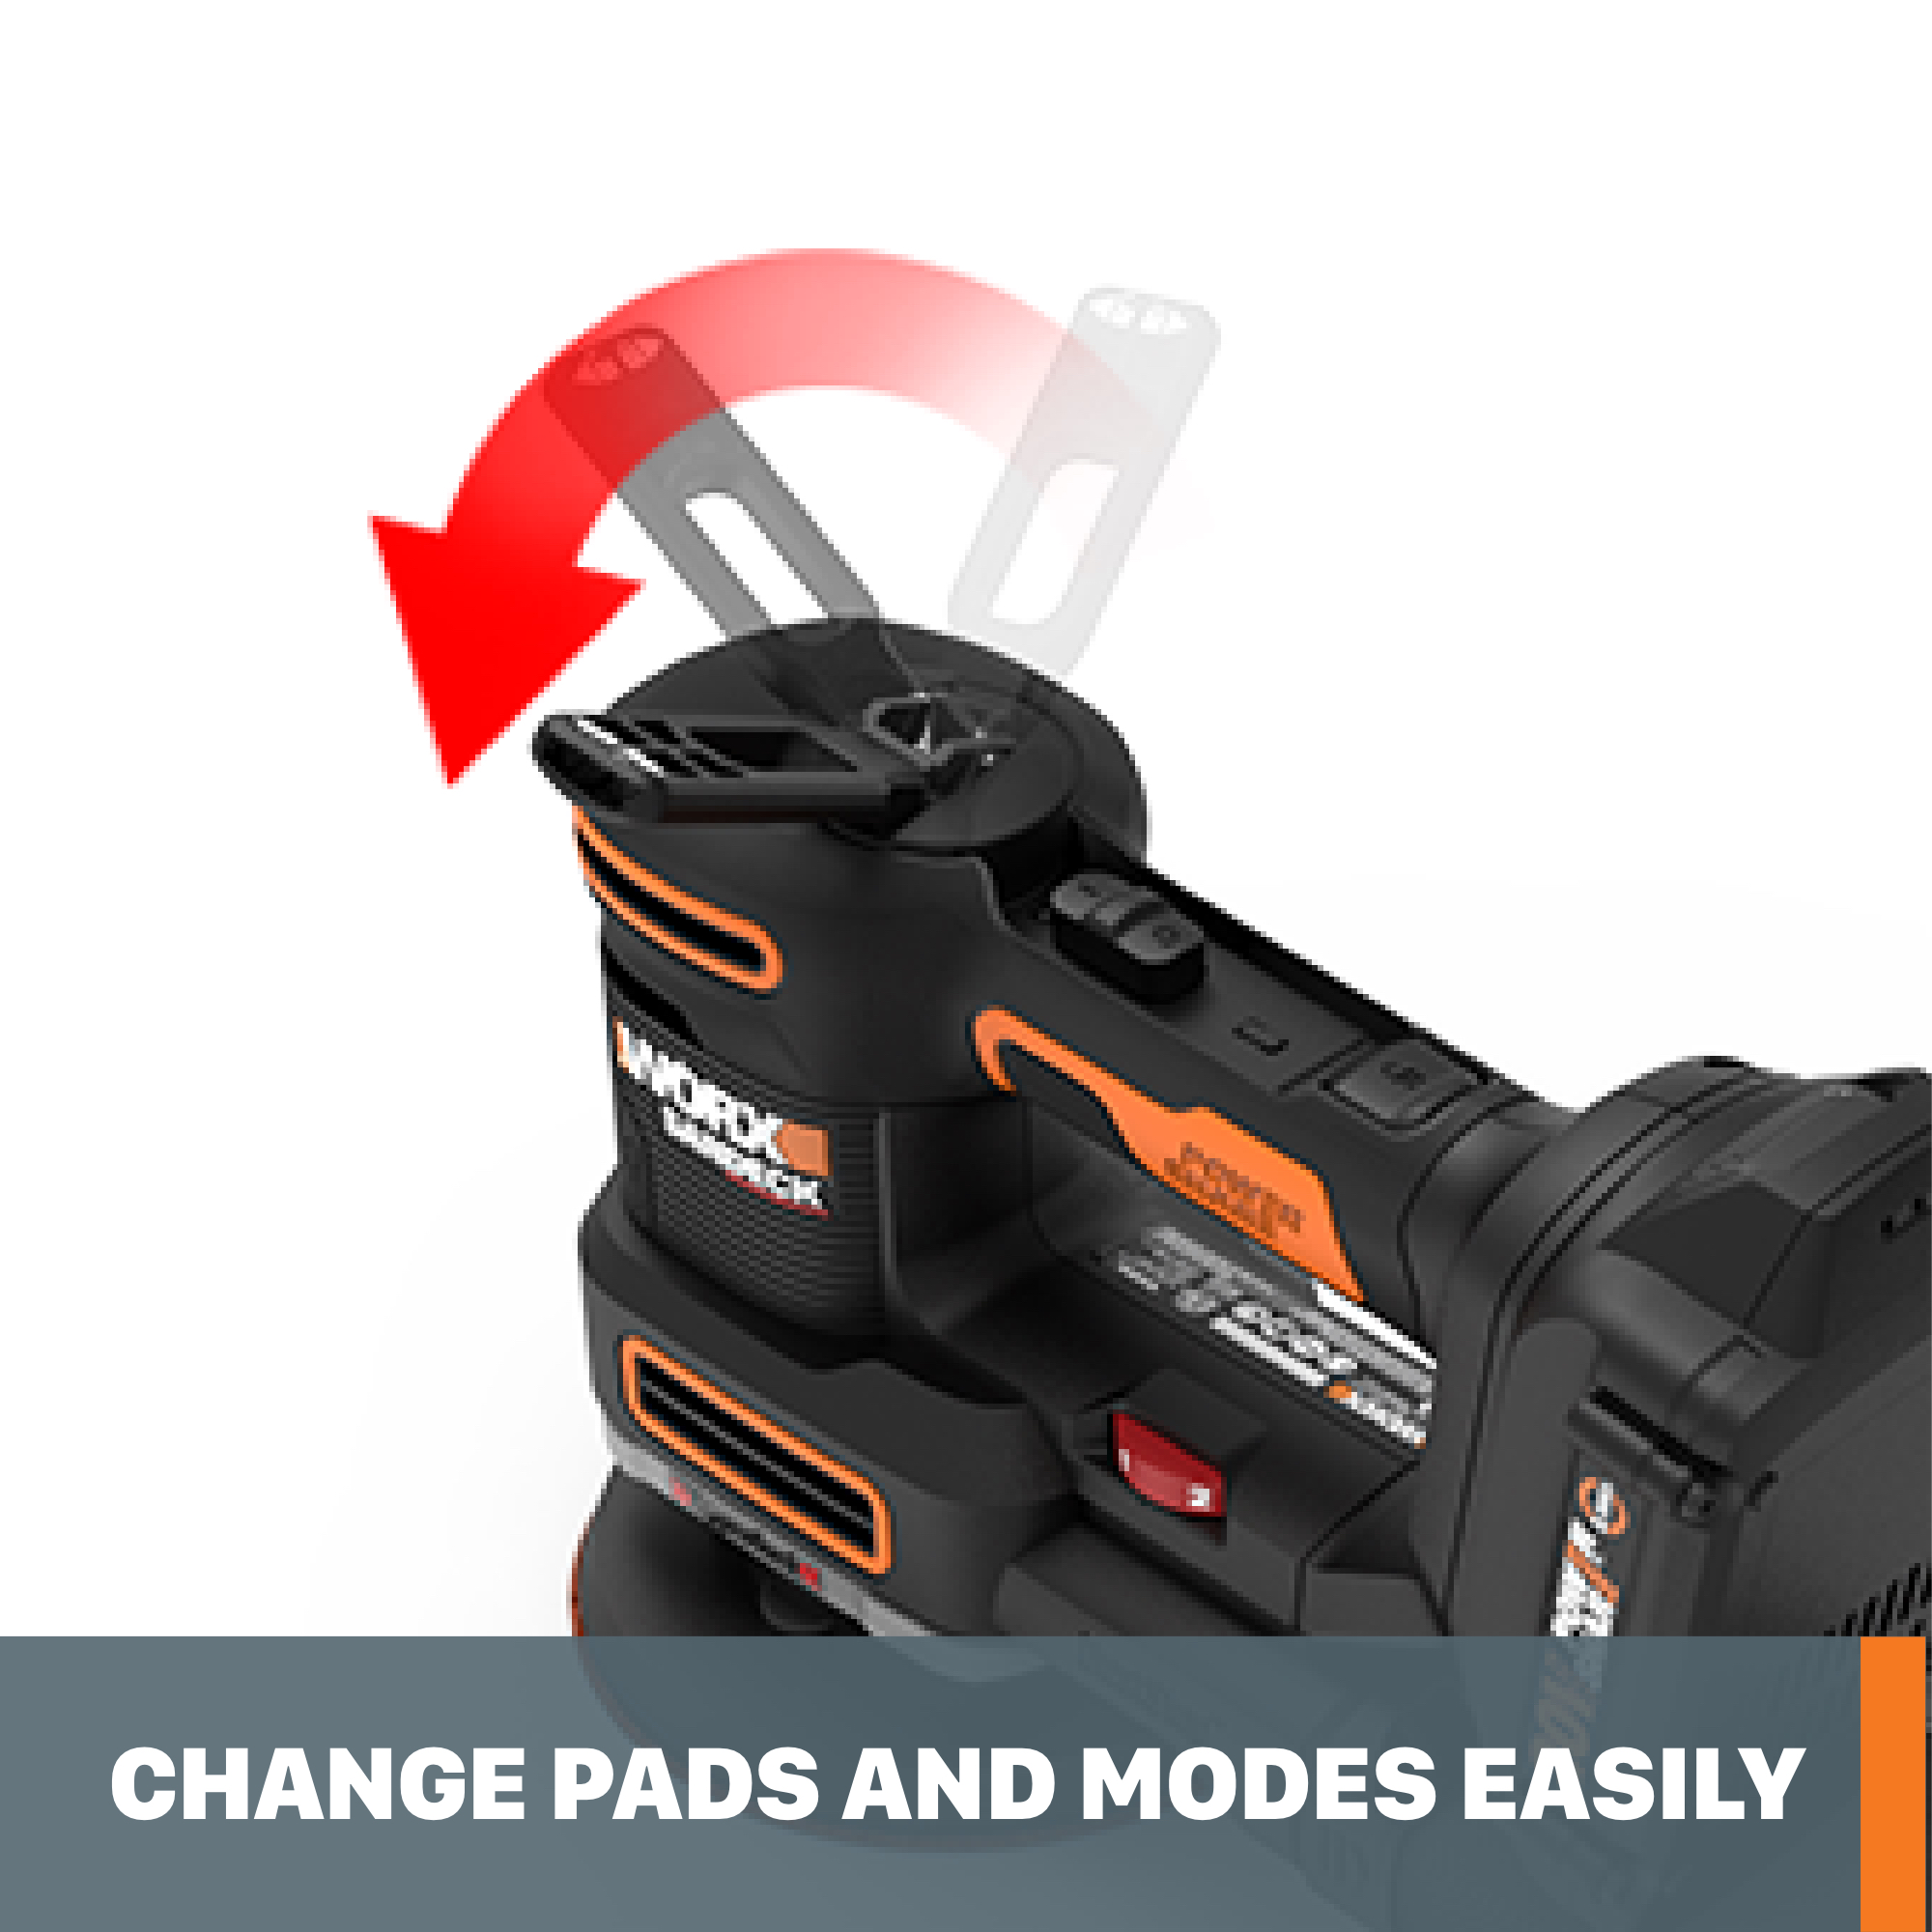 Worx WX820L.9 20V Power Share Sandeck 5-in-1 Cordless Multi-Sander (Tool Only) - image 4 of 6